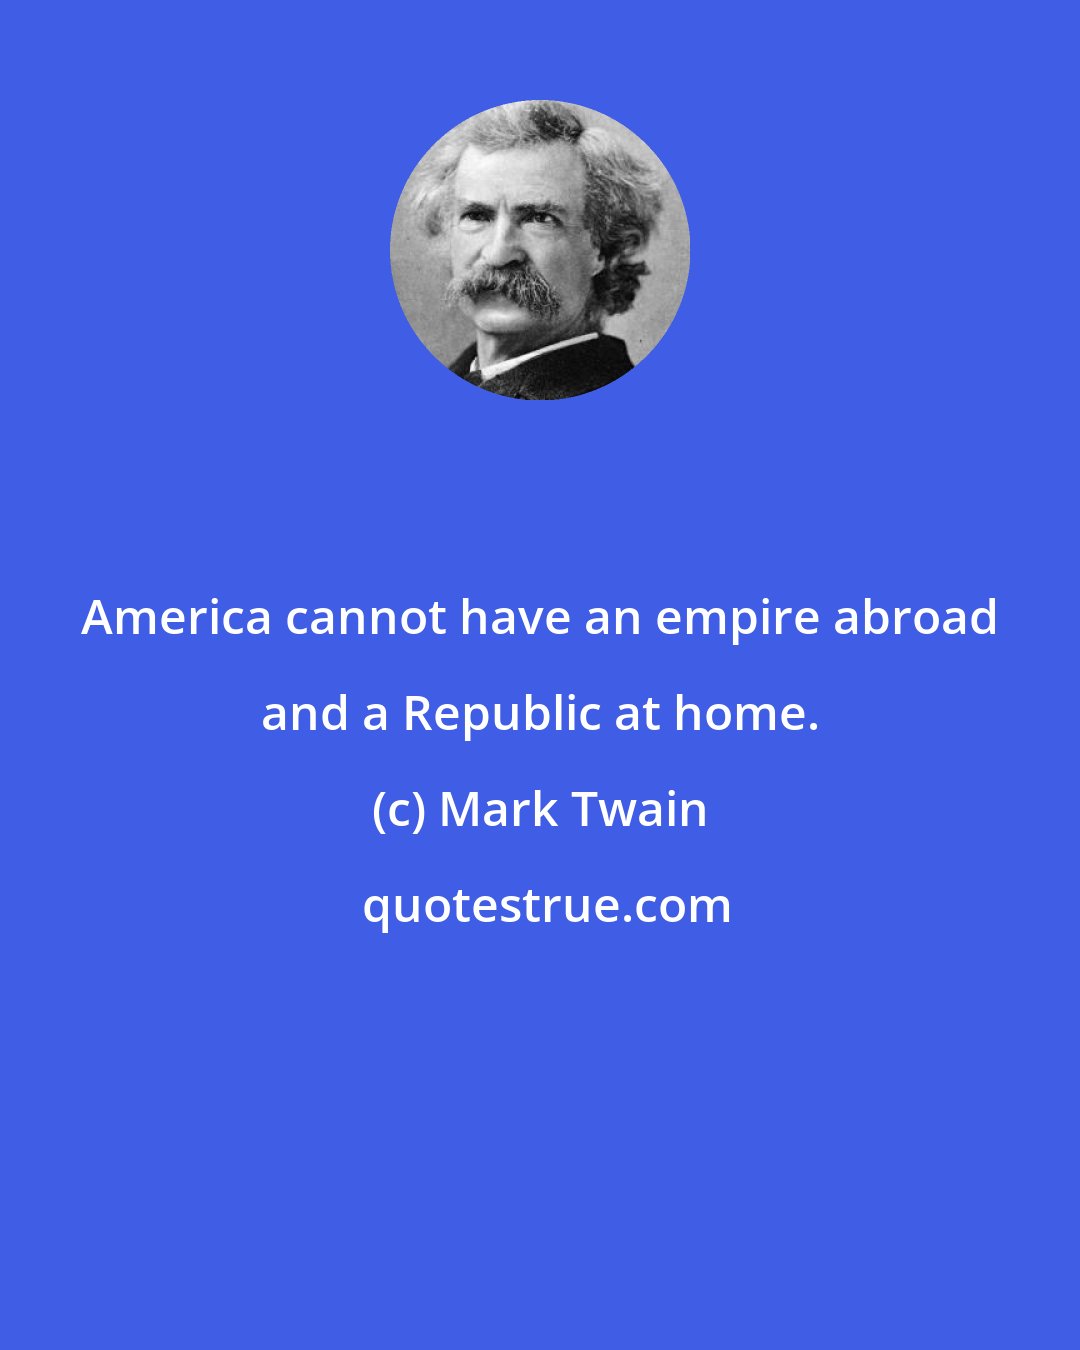 Mark Twain: America cannot have an empire abroad and a Republic at home.